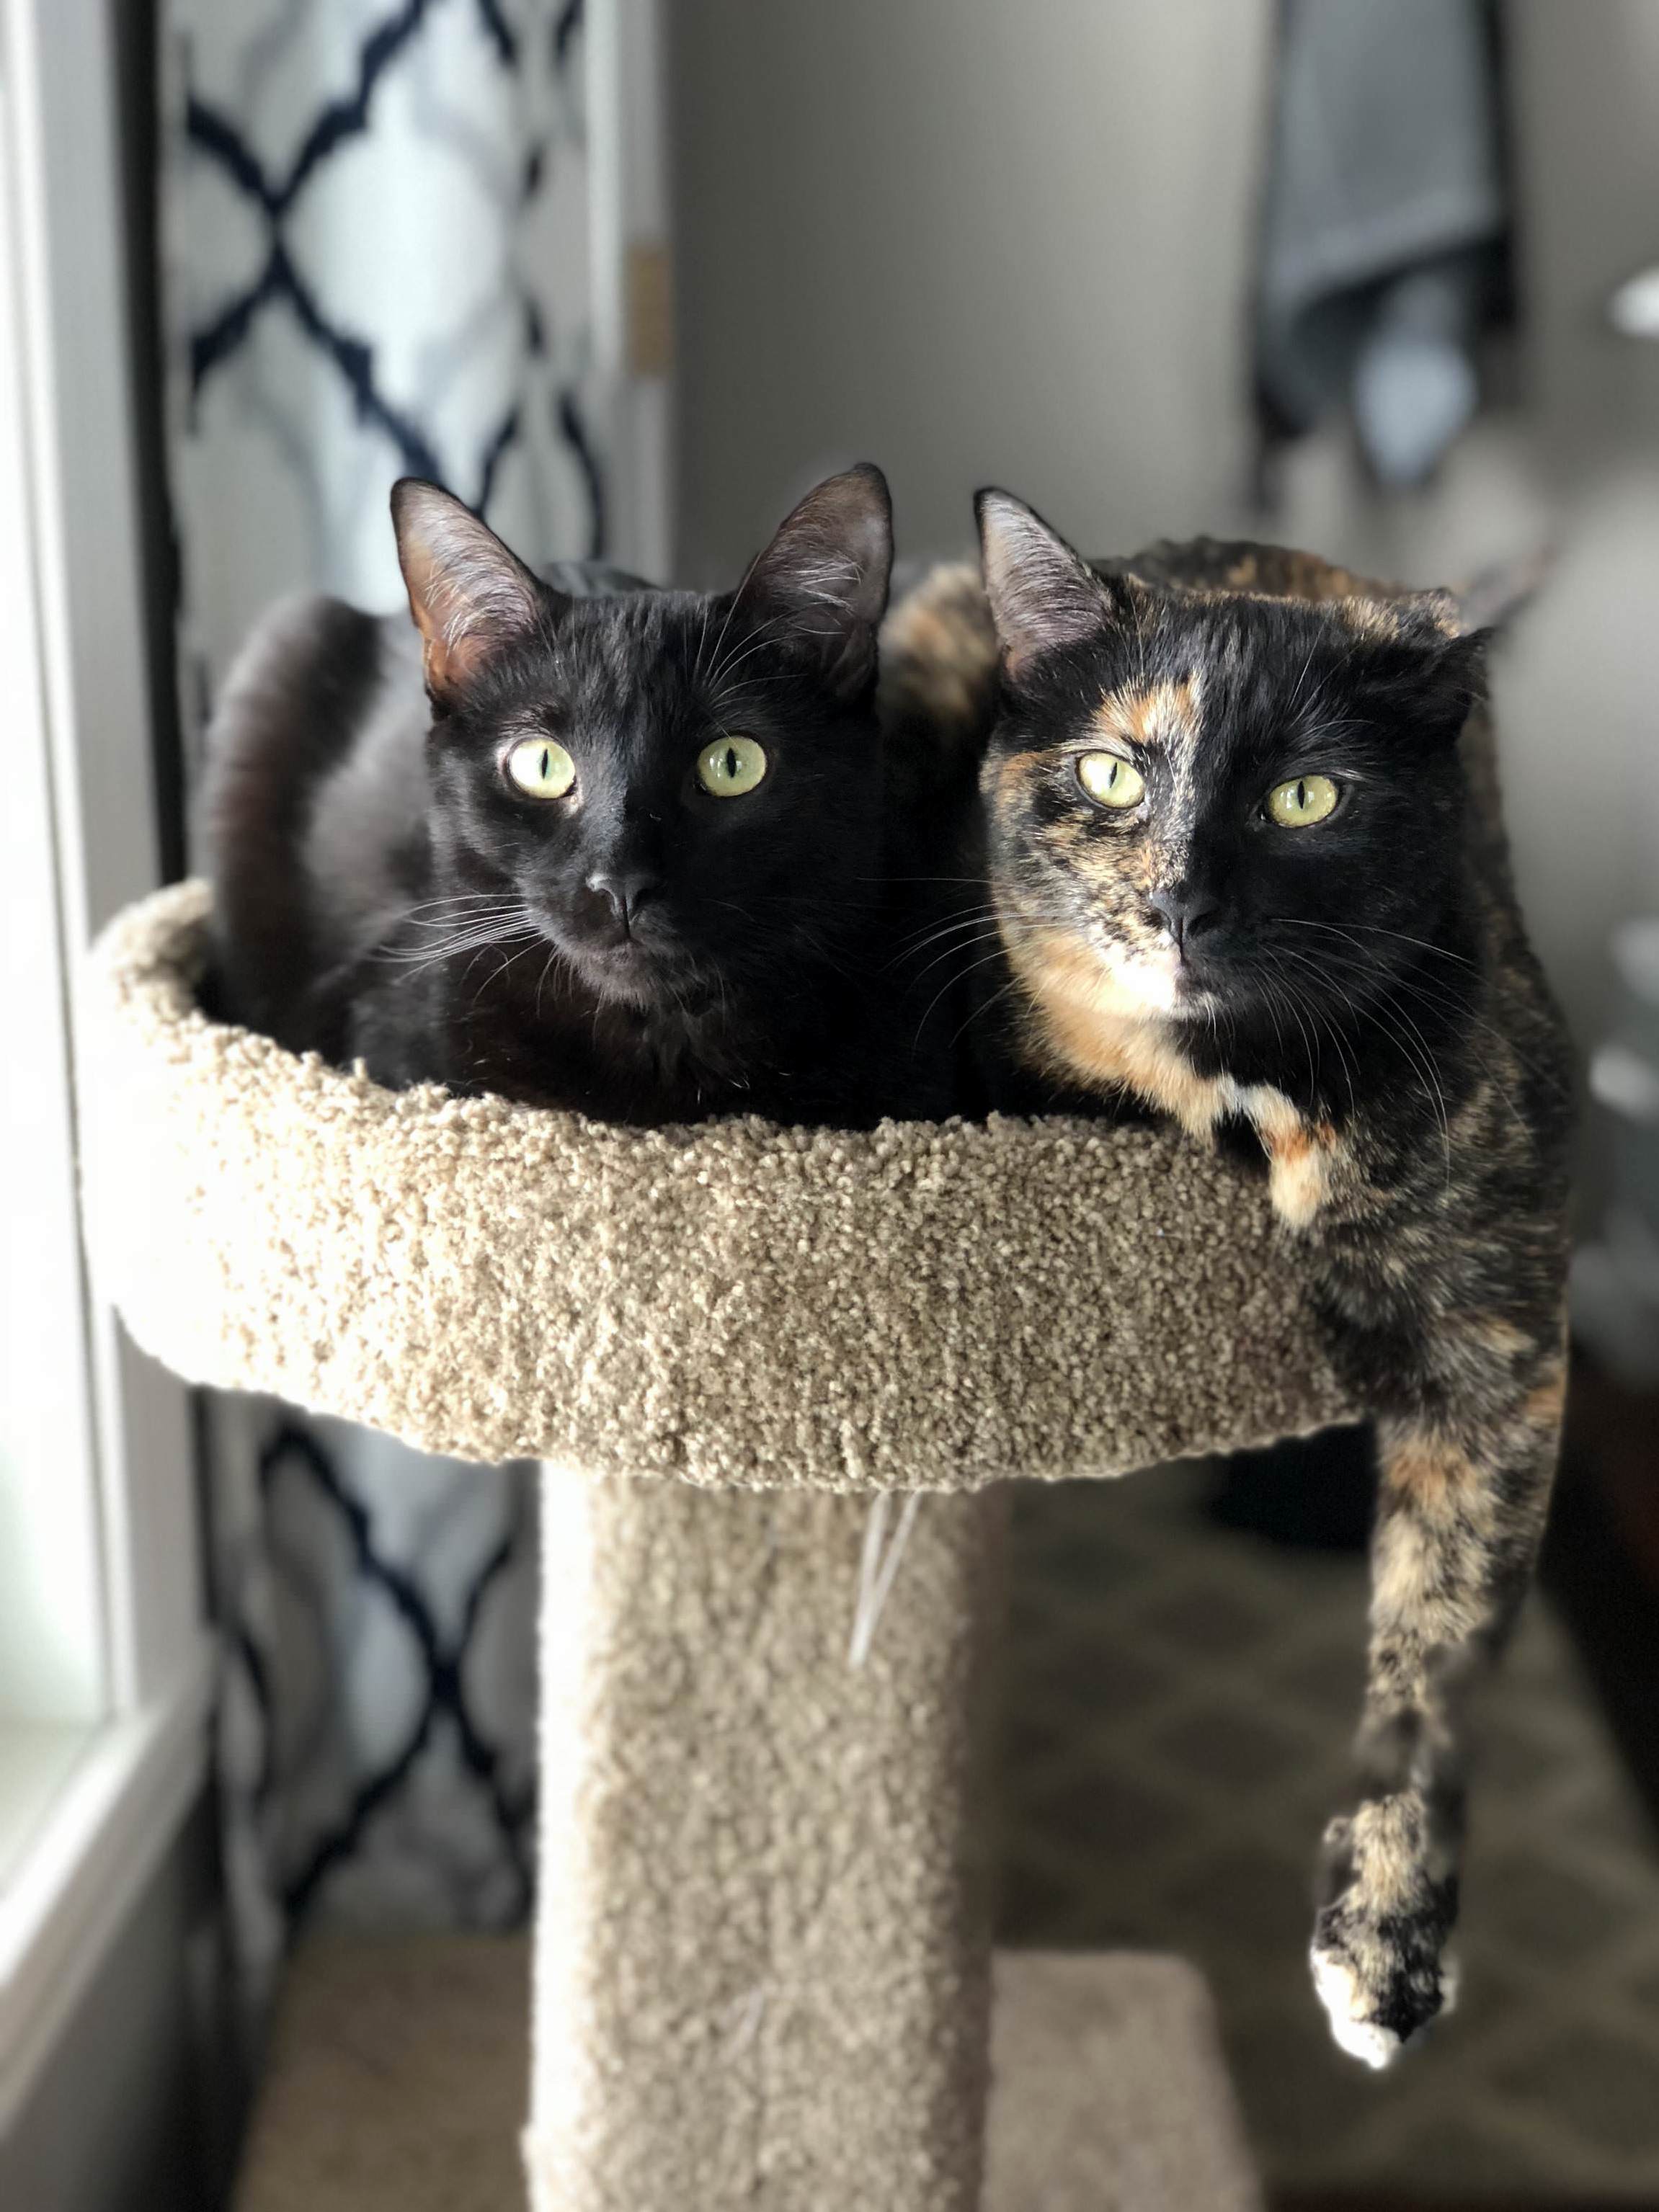 They may not fit as well as they once have…but they still like to hang together.